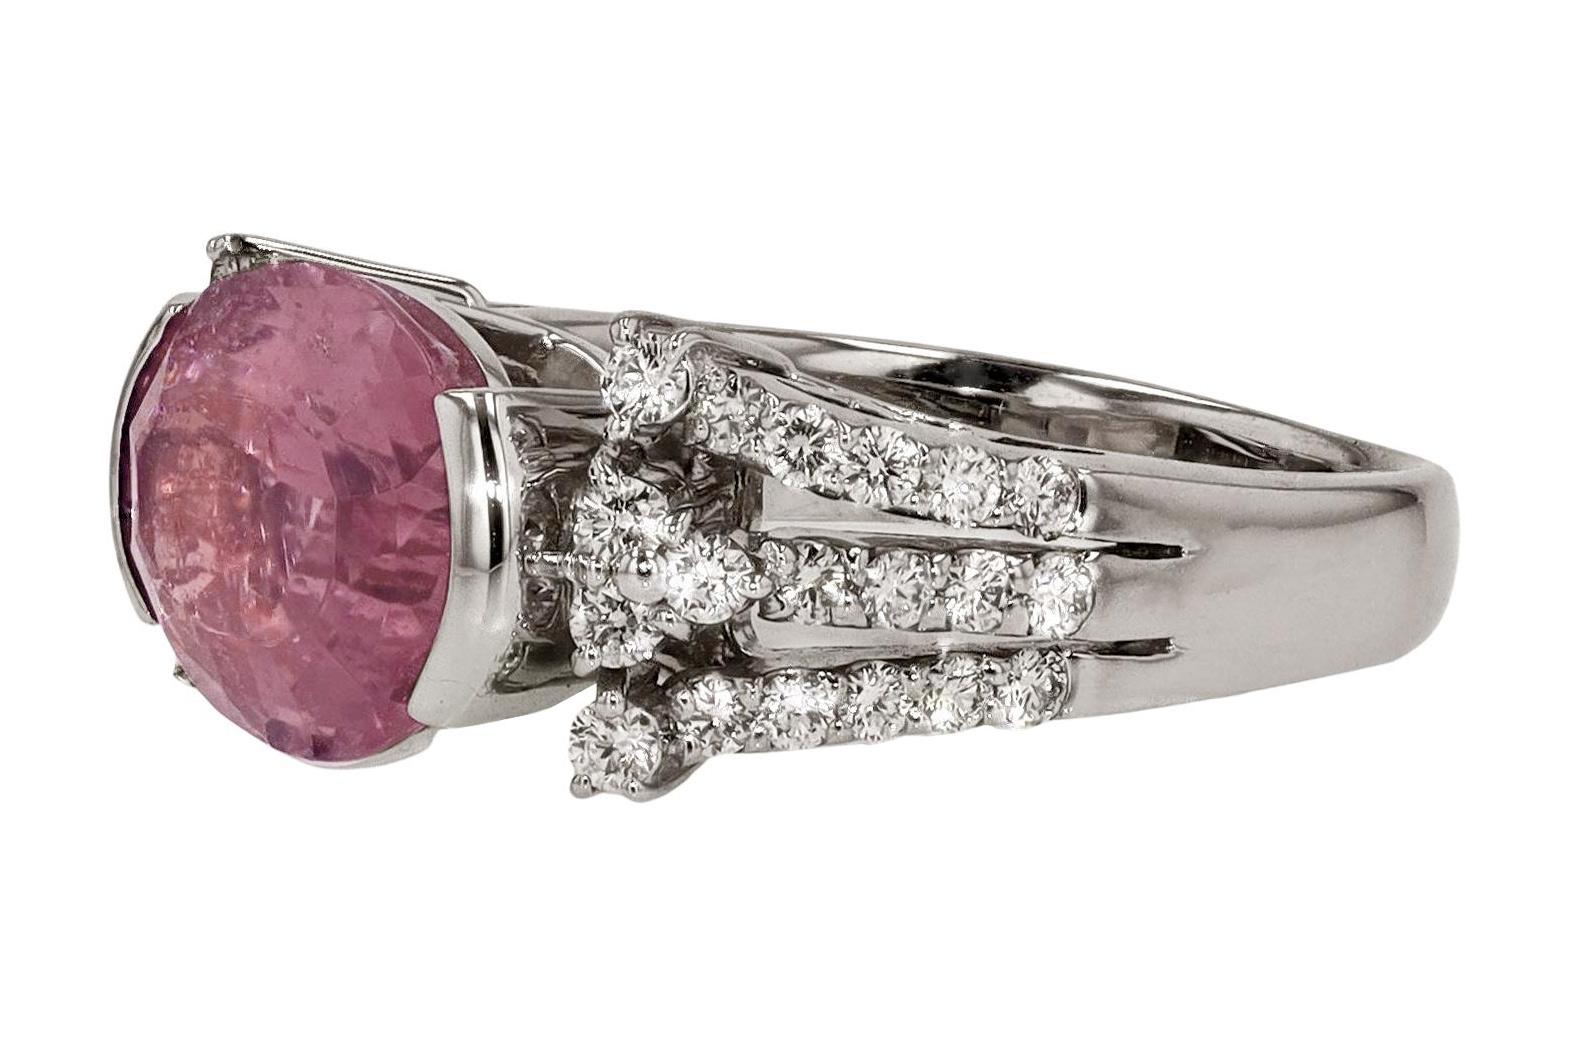 East West 6.90 Carat Pink Tourmaline and Diamond Ring In Excellent Condition For Sale In Santa Barbara, CA